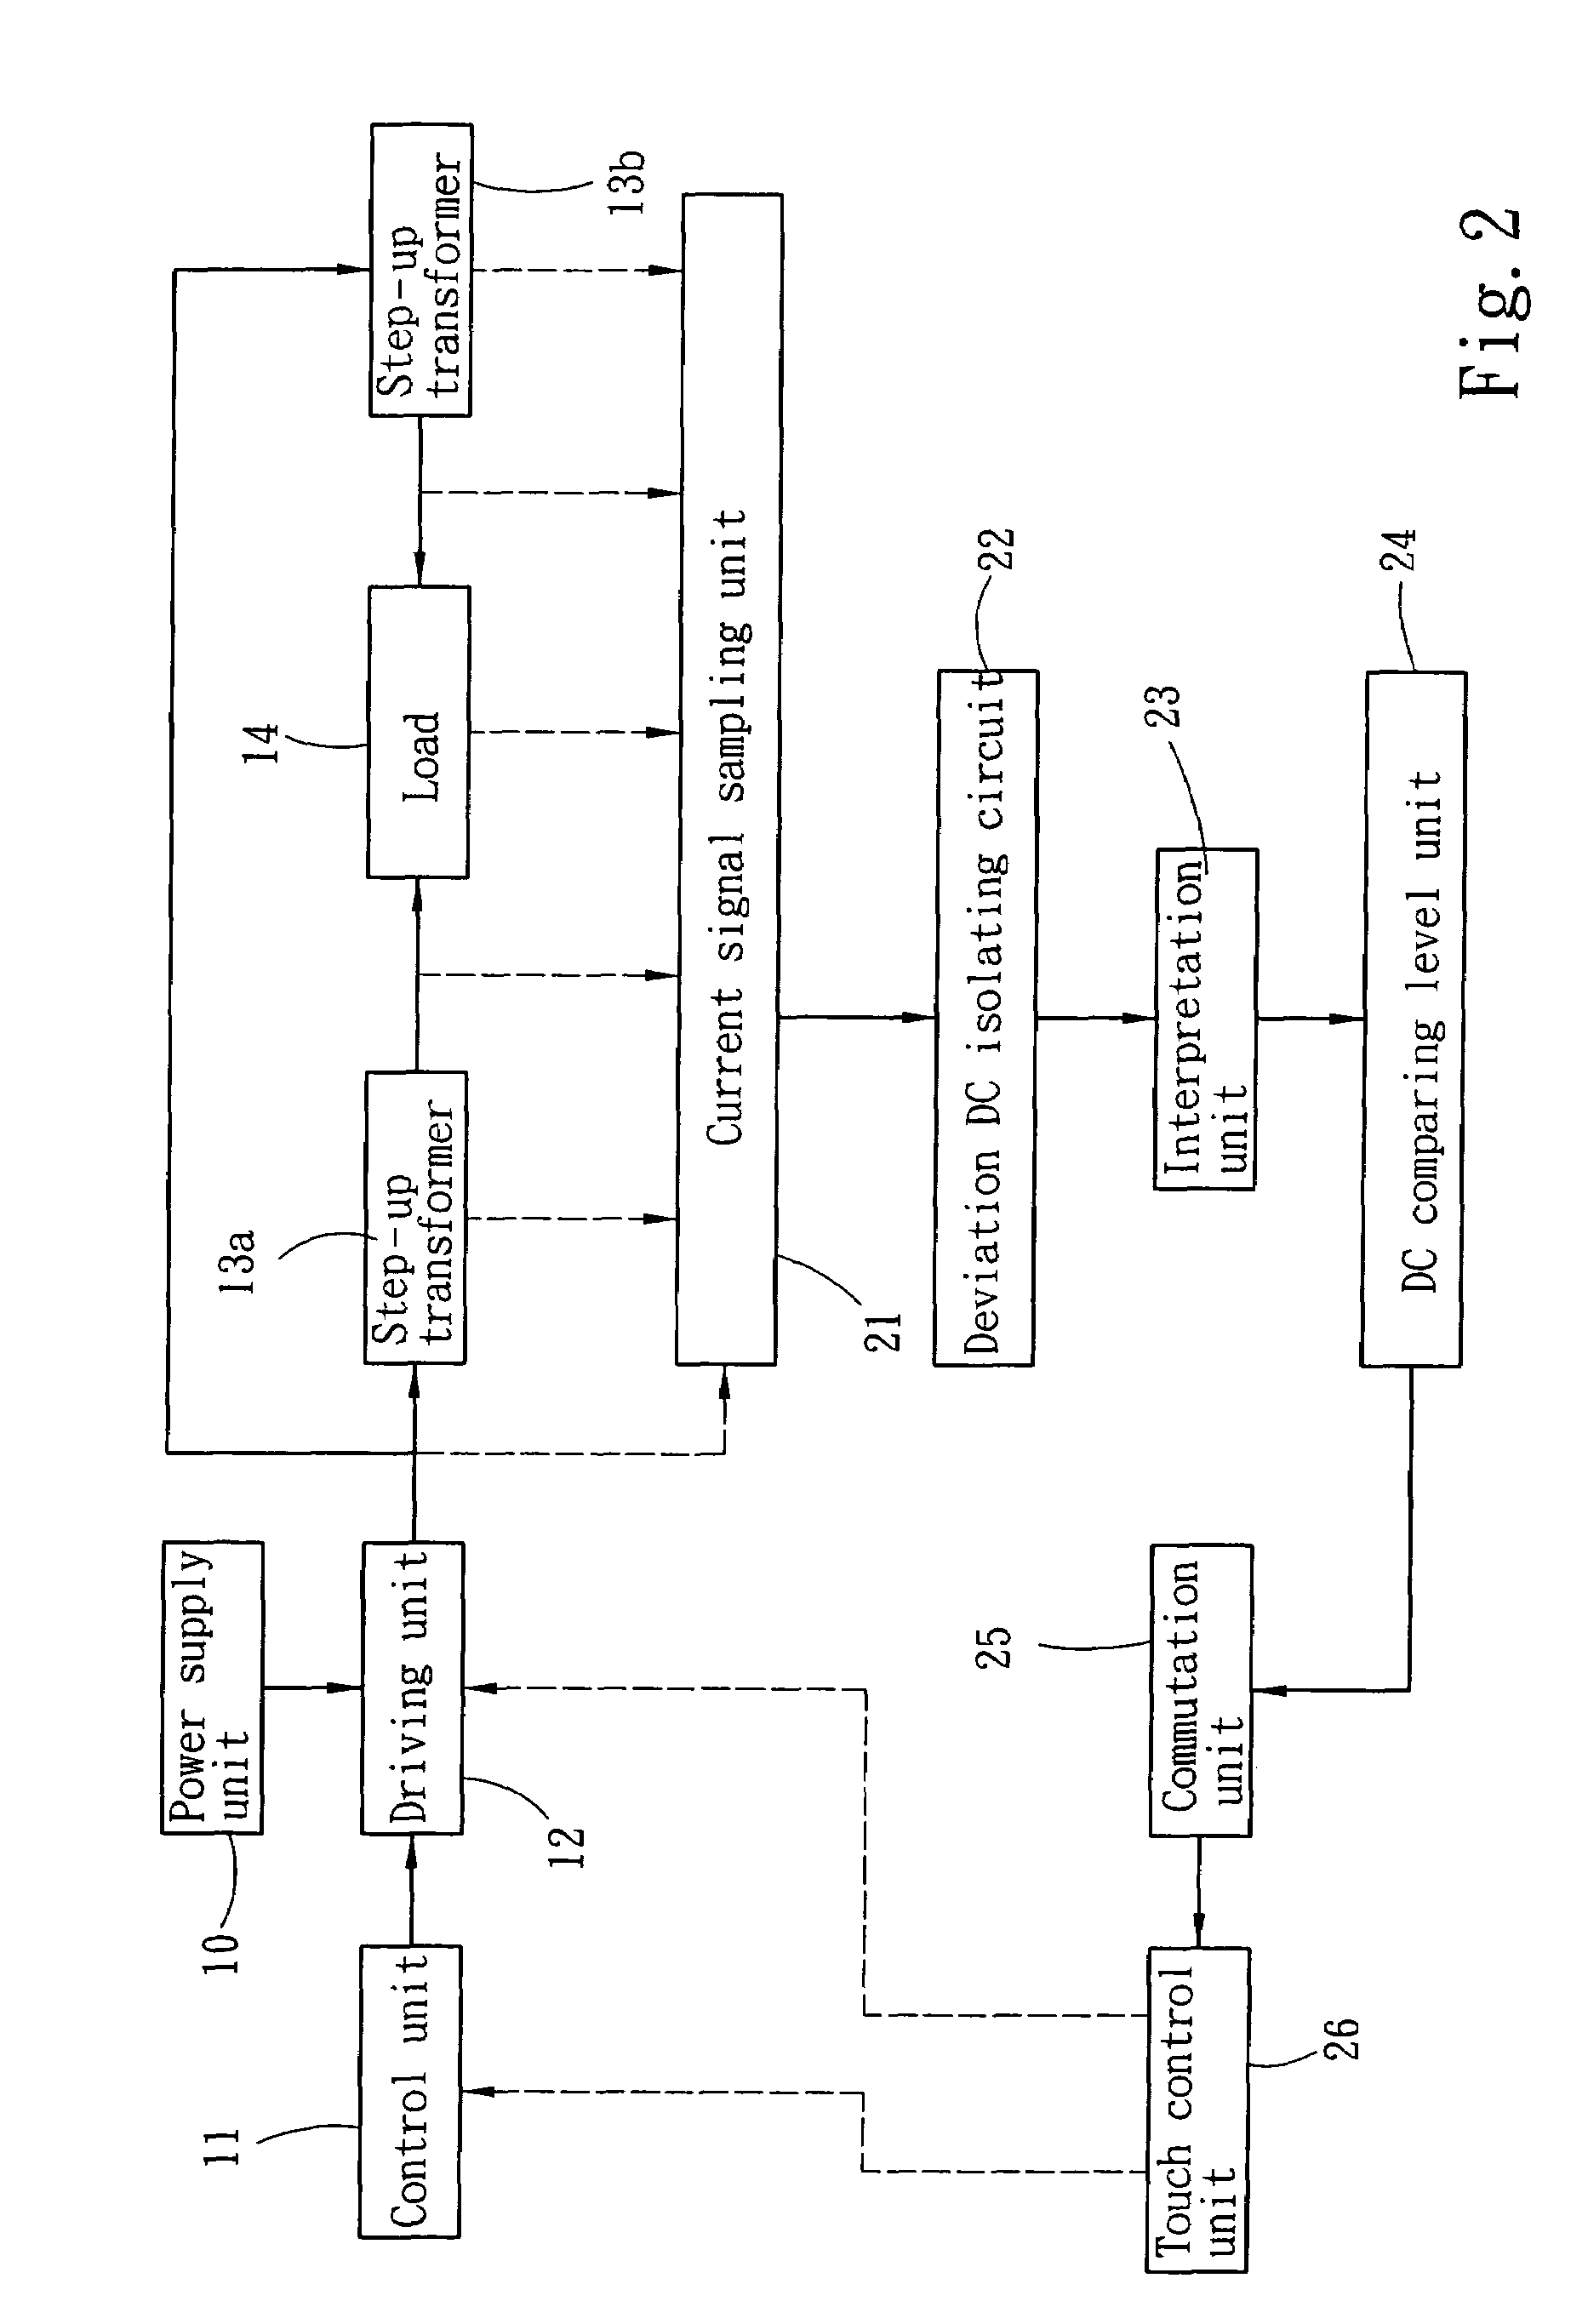 Arc discharge protection apparatus operating in current detection mode